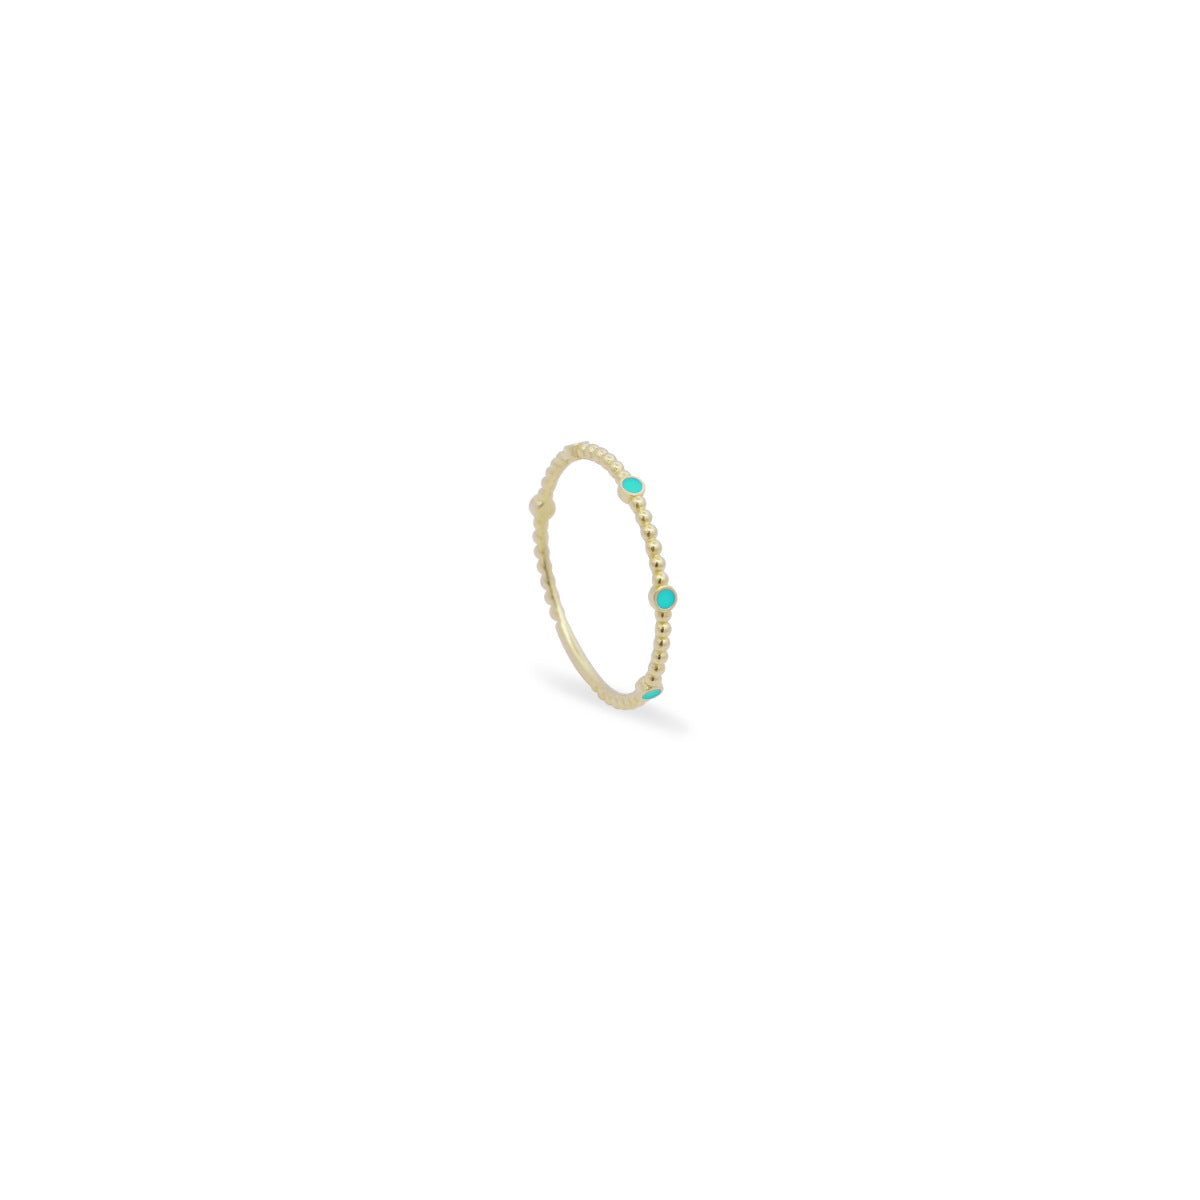 Rings - Knurled wedding ring and enamel dot - ORO18KT - 3 | Rue des Mille